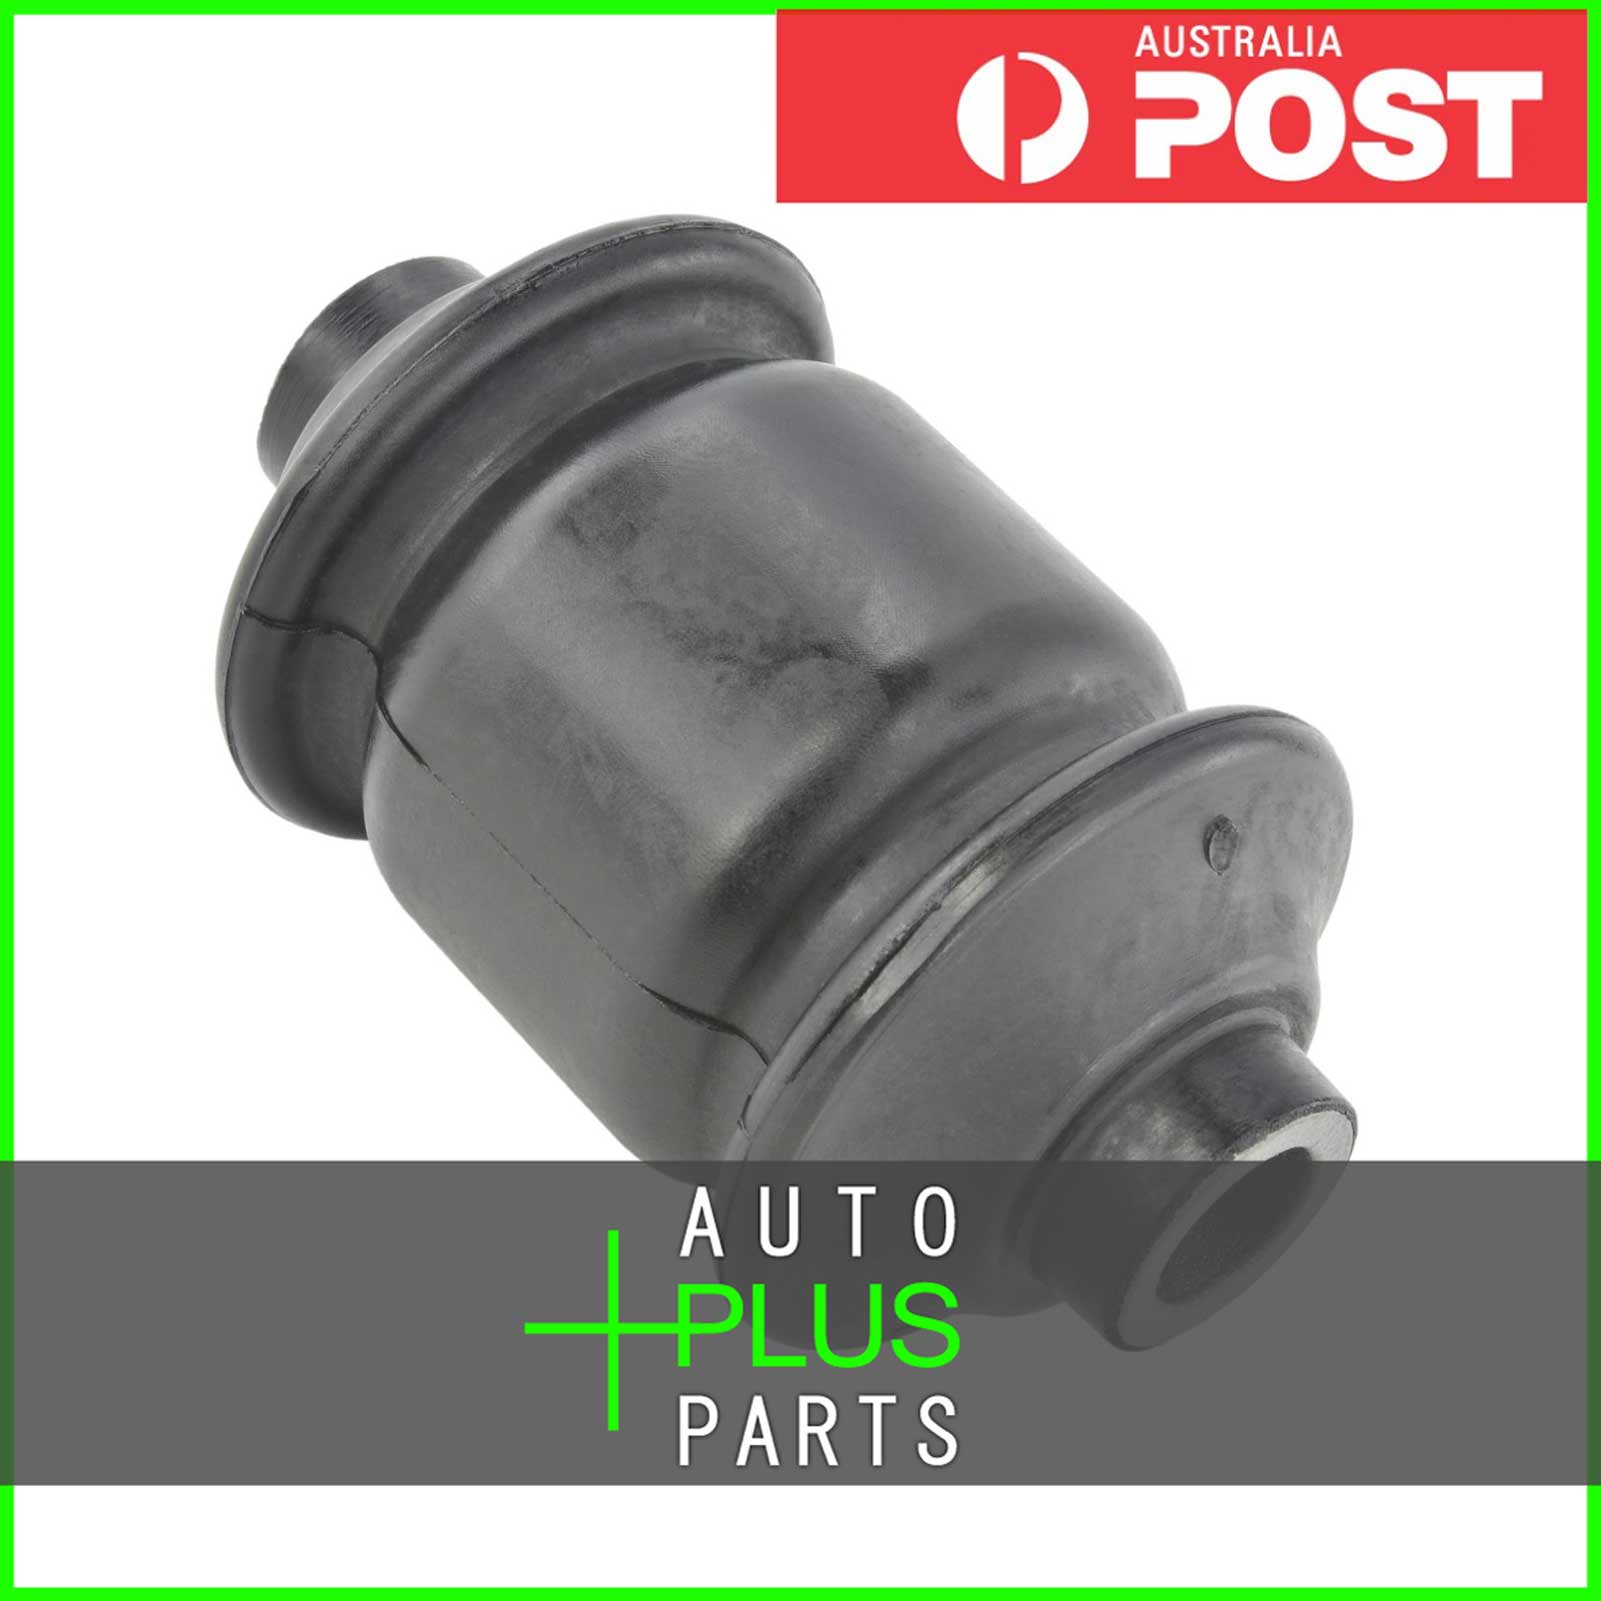 Fits VOLKSWAGEN CADDY 2004-2011 - REAR LEAF SPRING BUSHING Product Photo